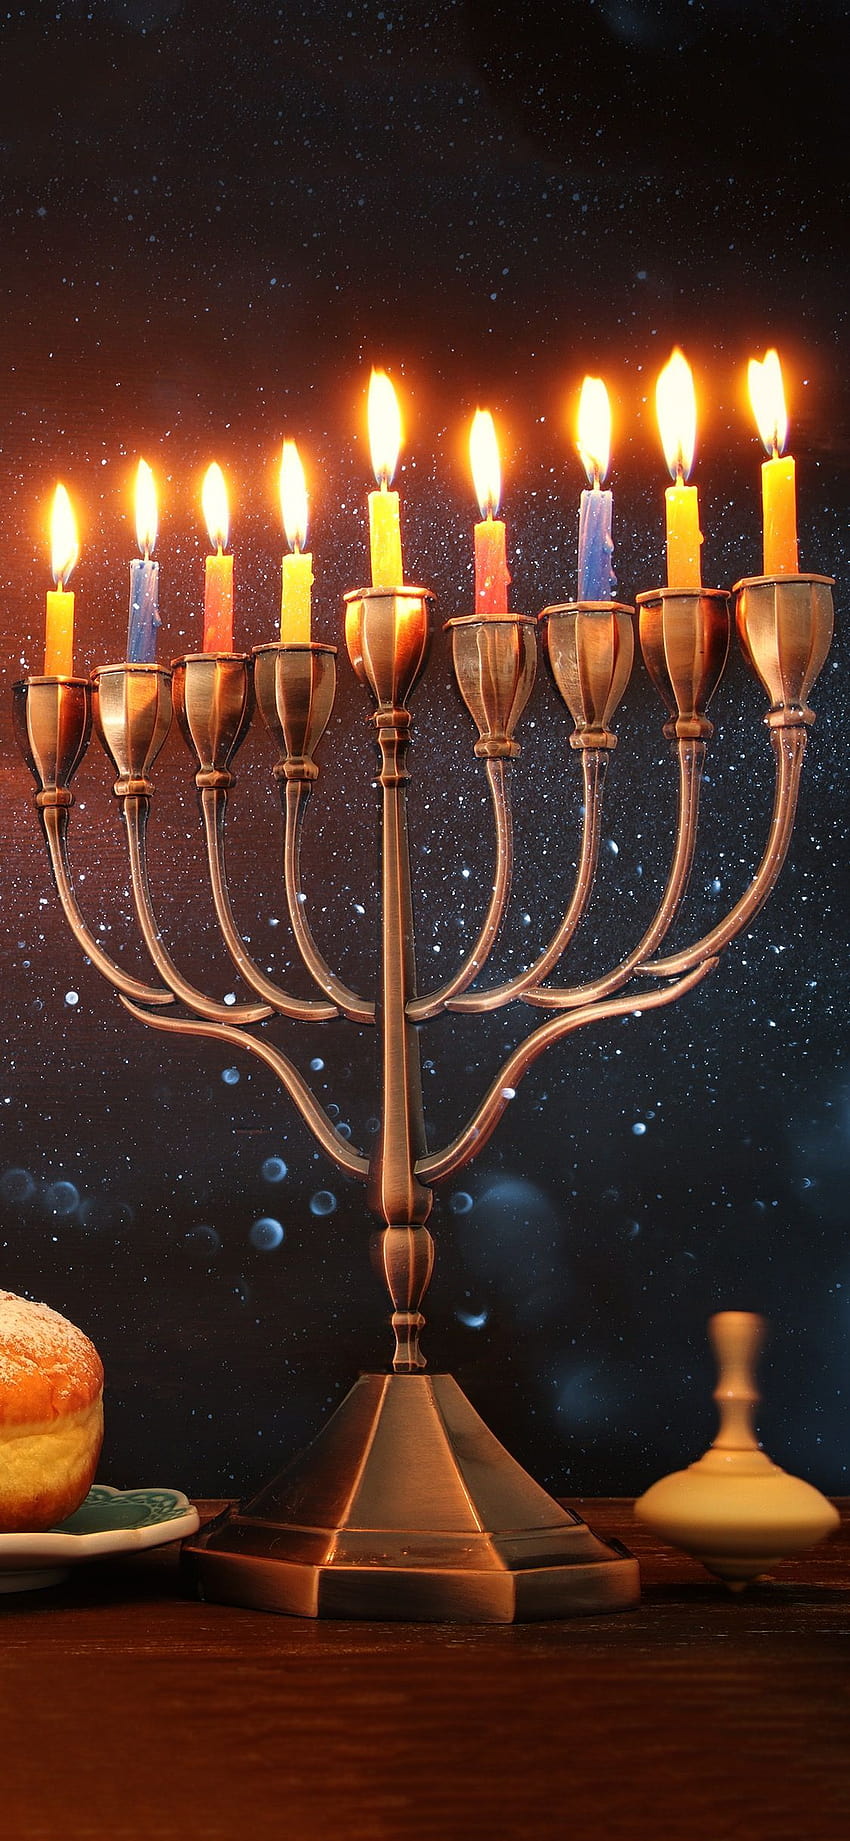 Religion Image Of Jewish Holiday Hanukkah Background With Menorah  (traditional Candelabra) And Spinning Top Toy Stock Photo, Picture and  Royalty Free Image. Image 176346326.